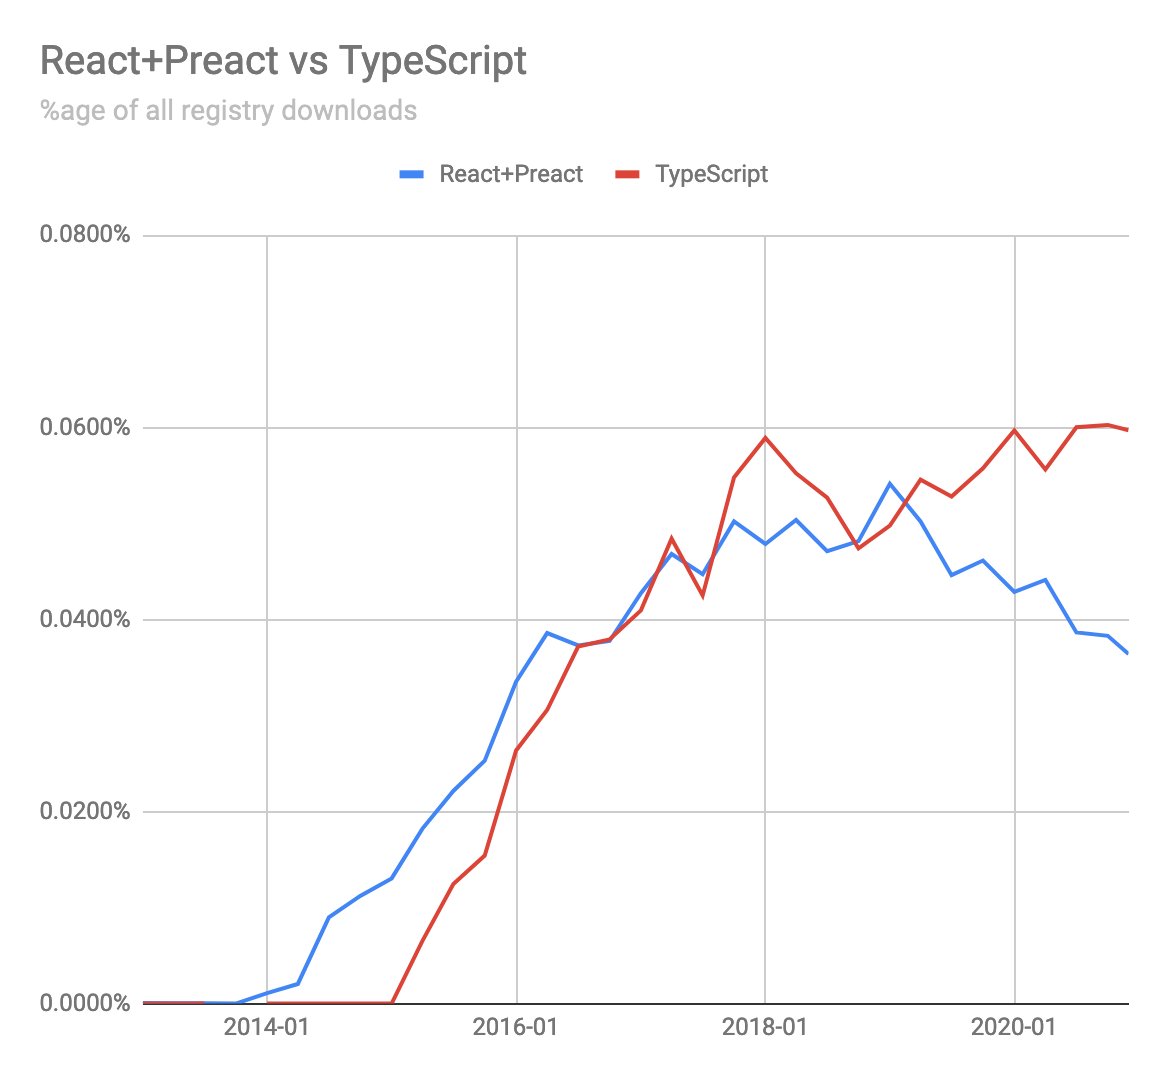 So TypeScript itself is showing a plateau. To be pushing React down by sheer weight of numbers it would have to be growing *much* faster than this. Let's look for a corroboration...